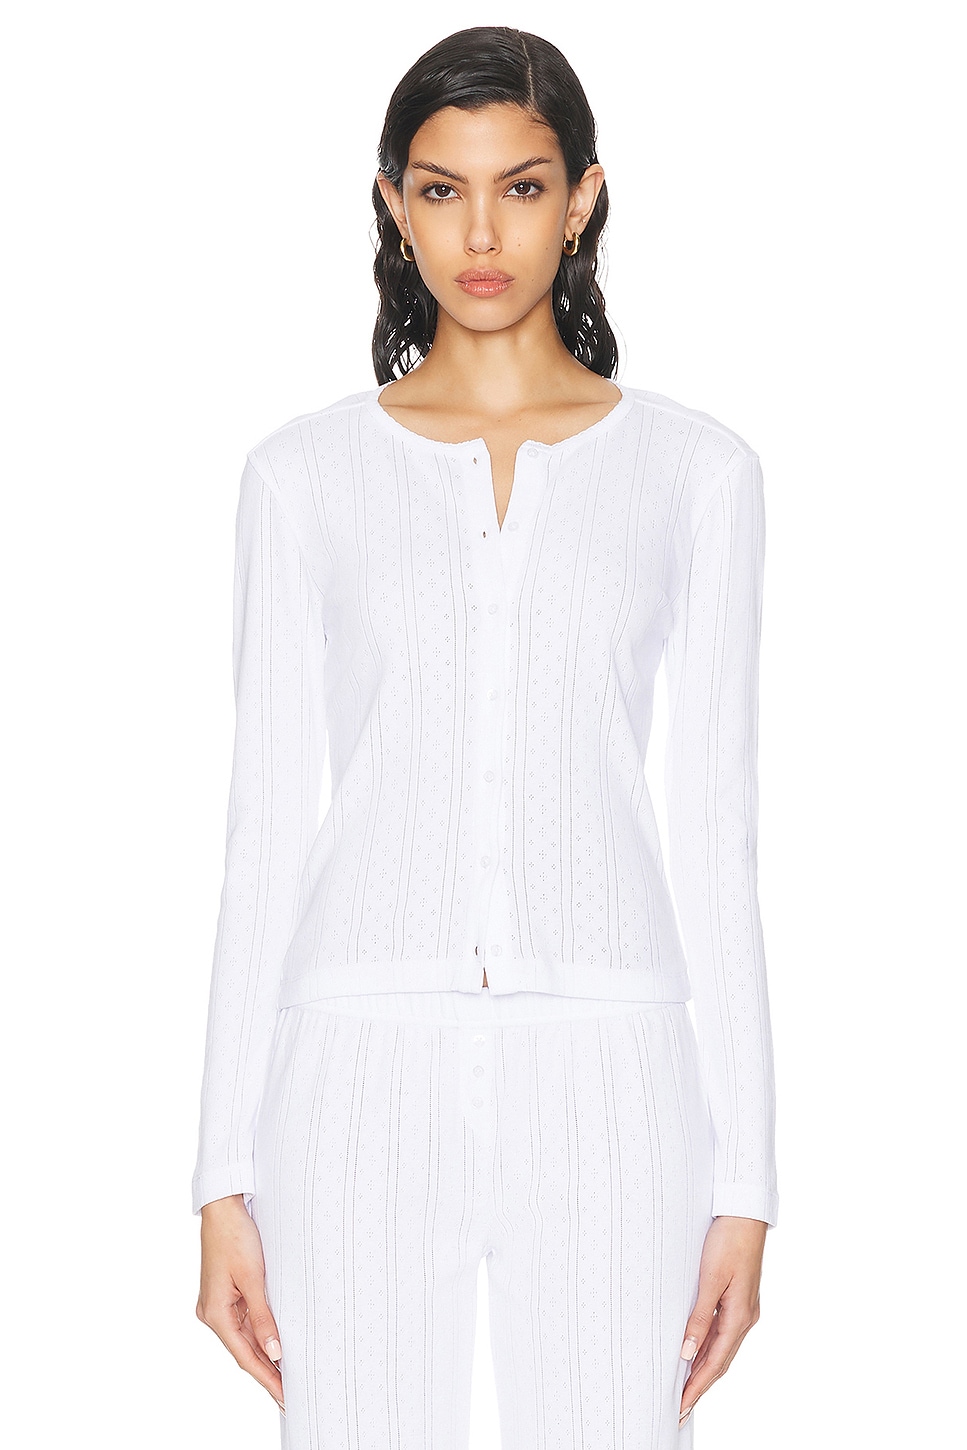 Cou Cou Intimates The Cardi In White